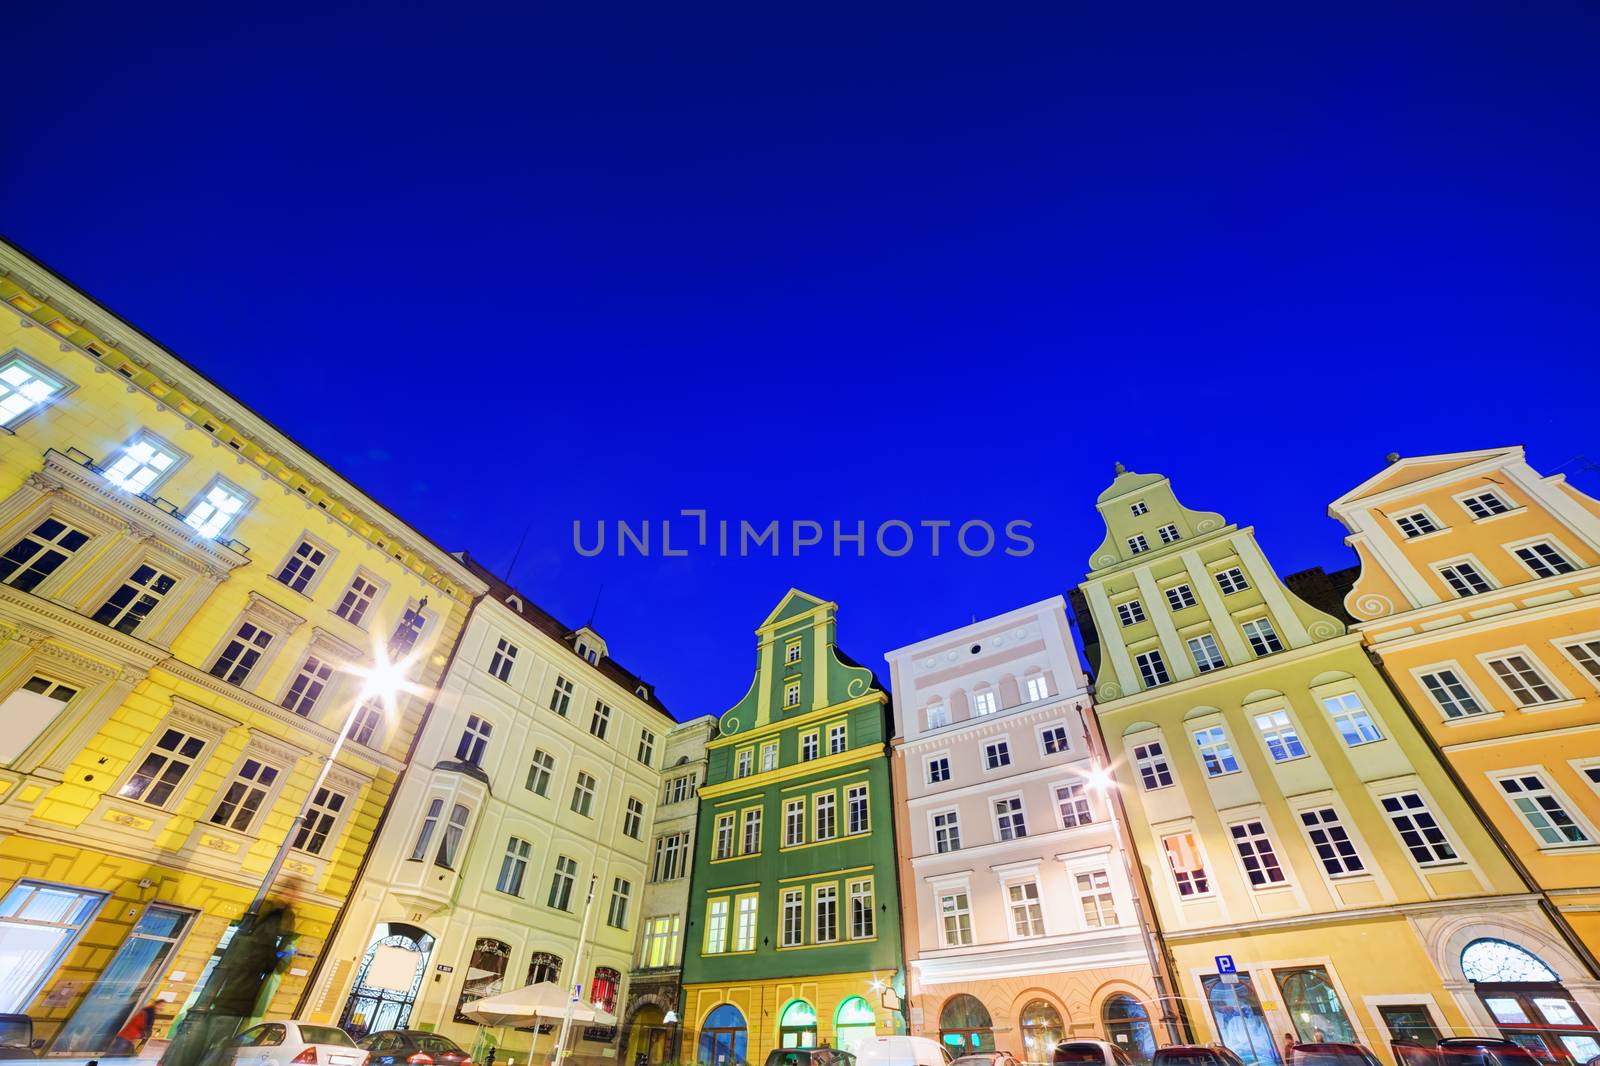 Wroclaw, Poland in Silesia region. The market square at night by photocreo